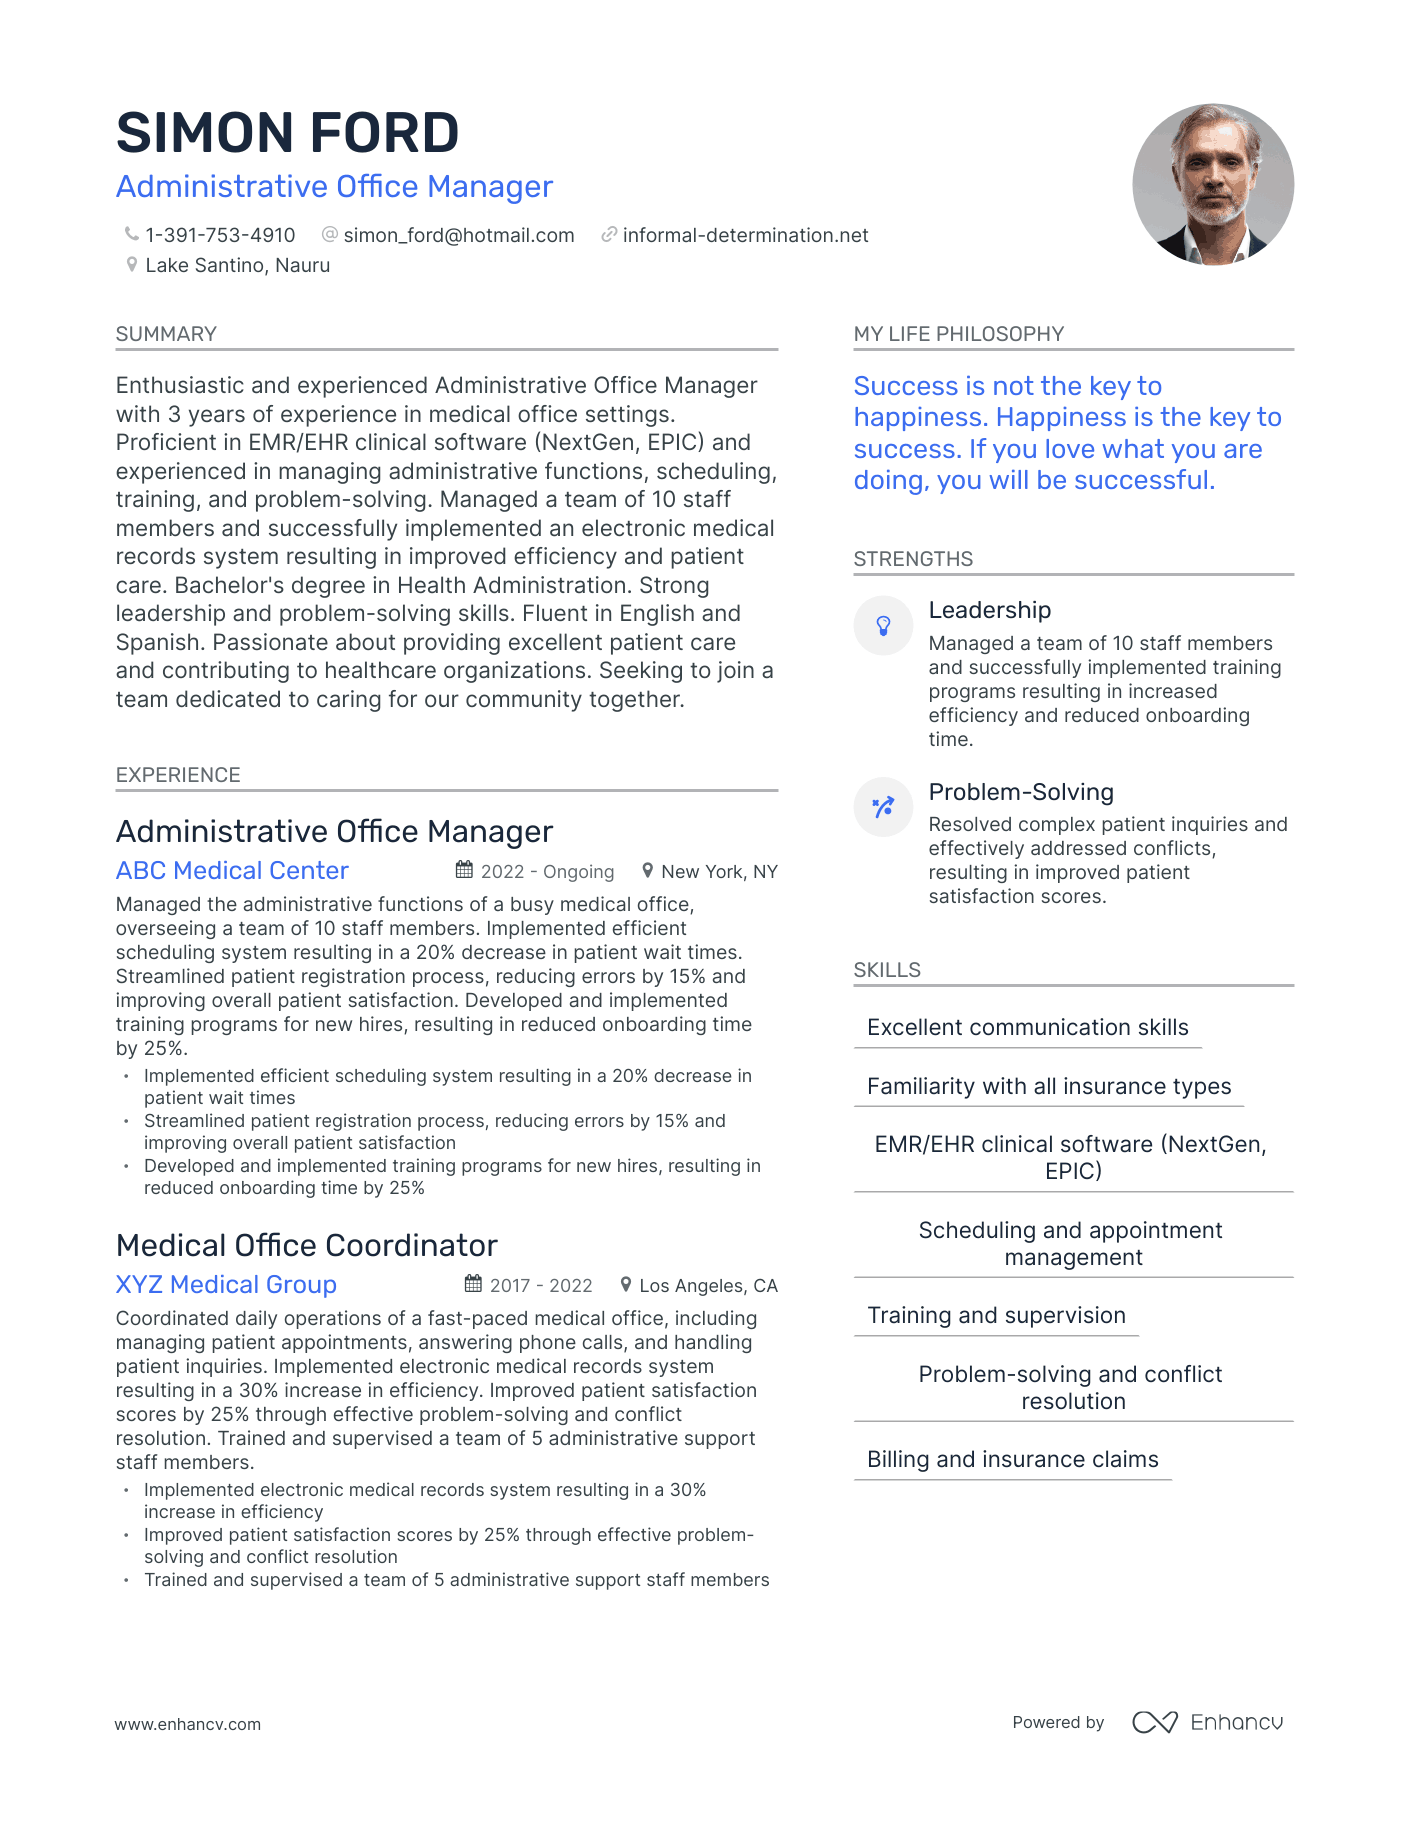 Administrative Office Manager resume example